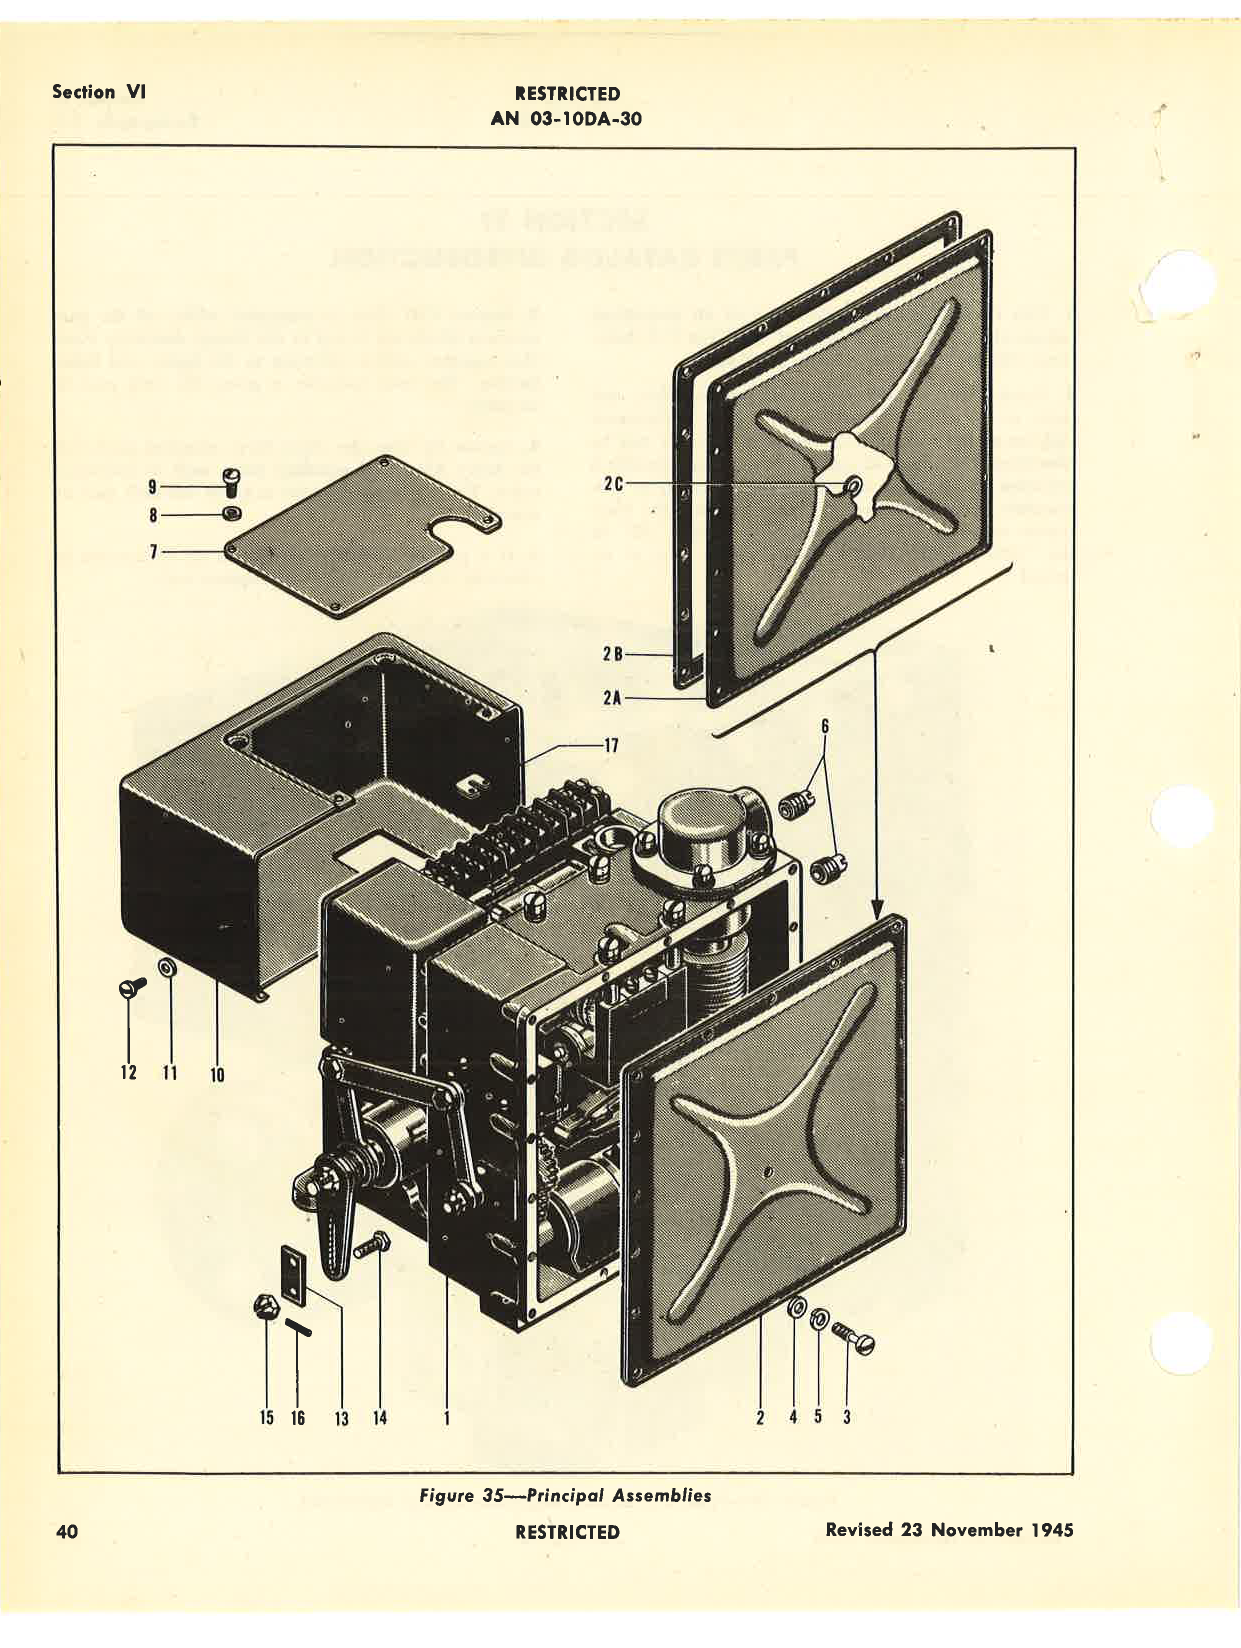 Sample page 8 from AirCorps Library document: Overhaul Instructions with Parts Catalog for Automatic Electric Regulator Type C-6